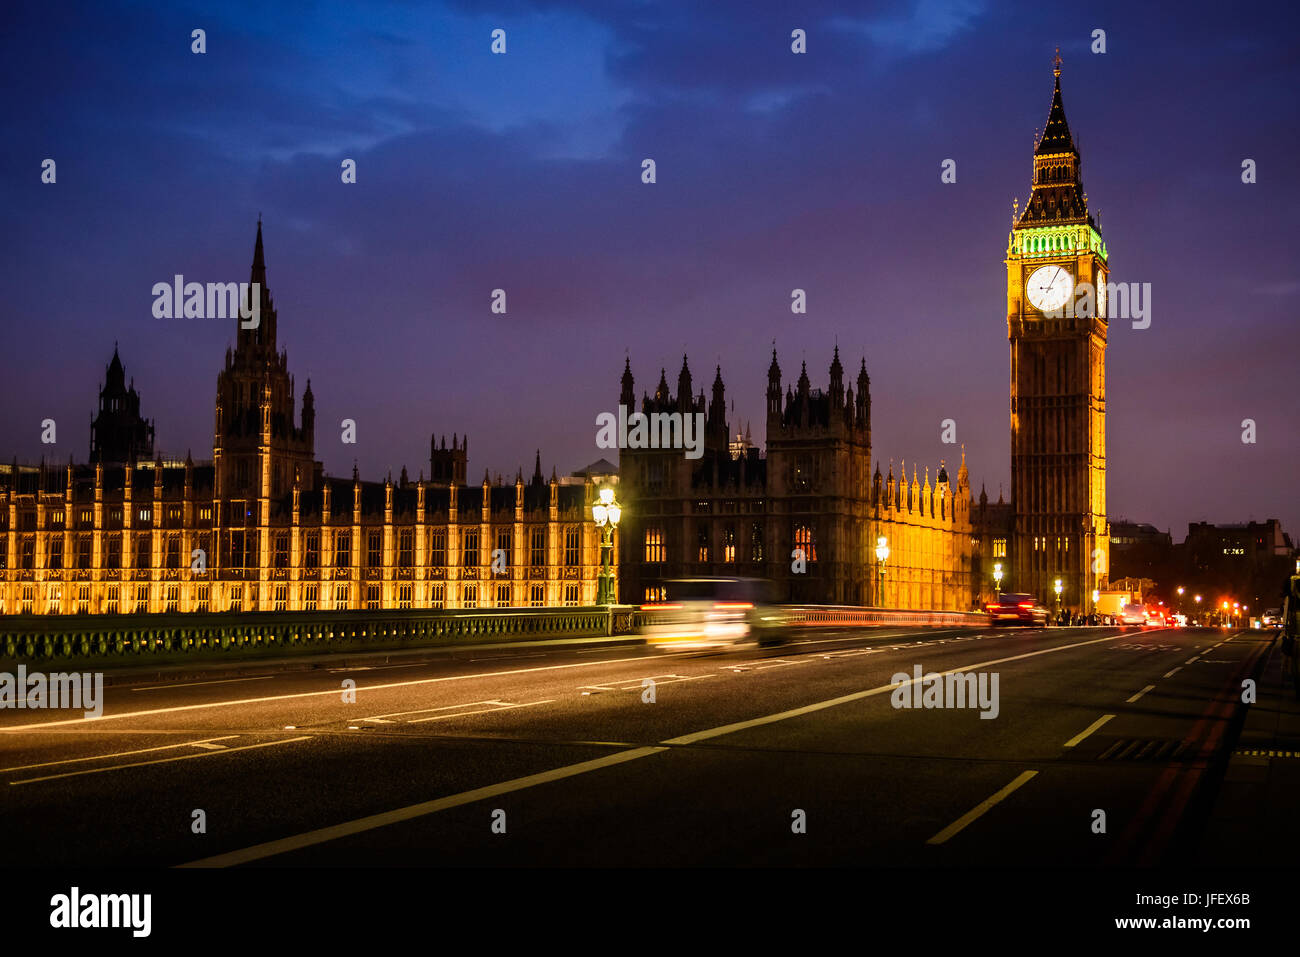 Big Ben Clock Tower and House of Parliament in the night, London, England, UK, selective focus Stock Photo